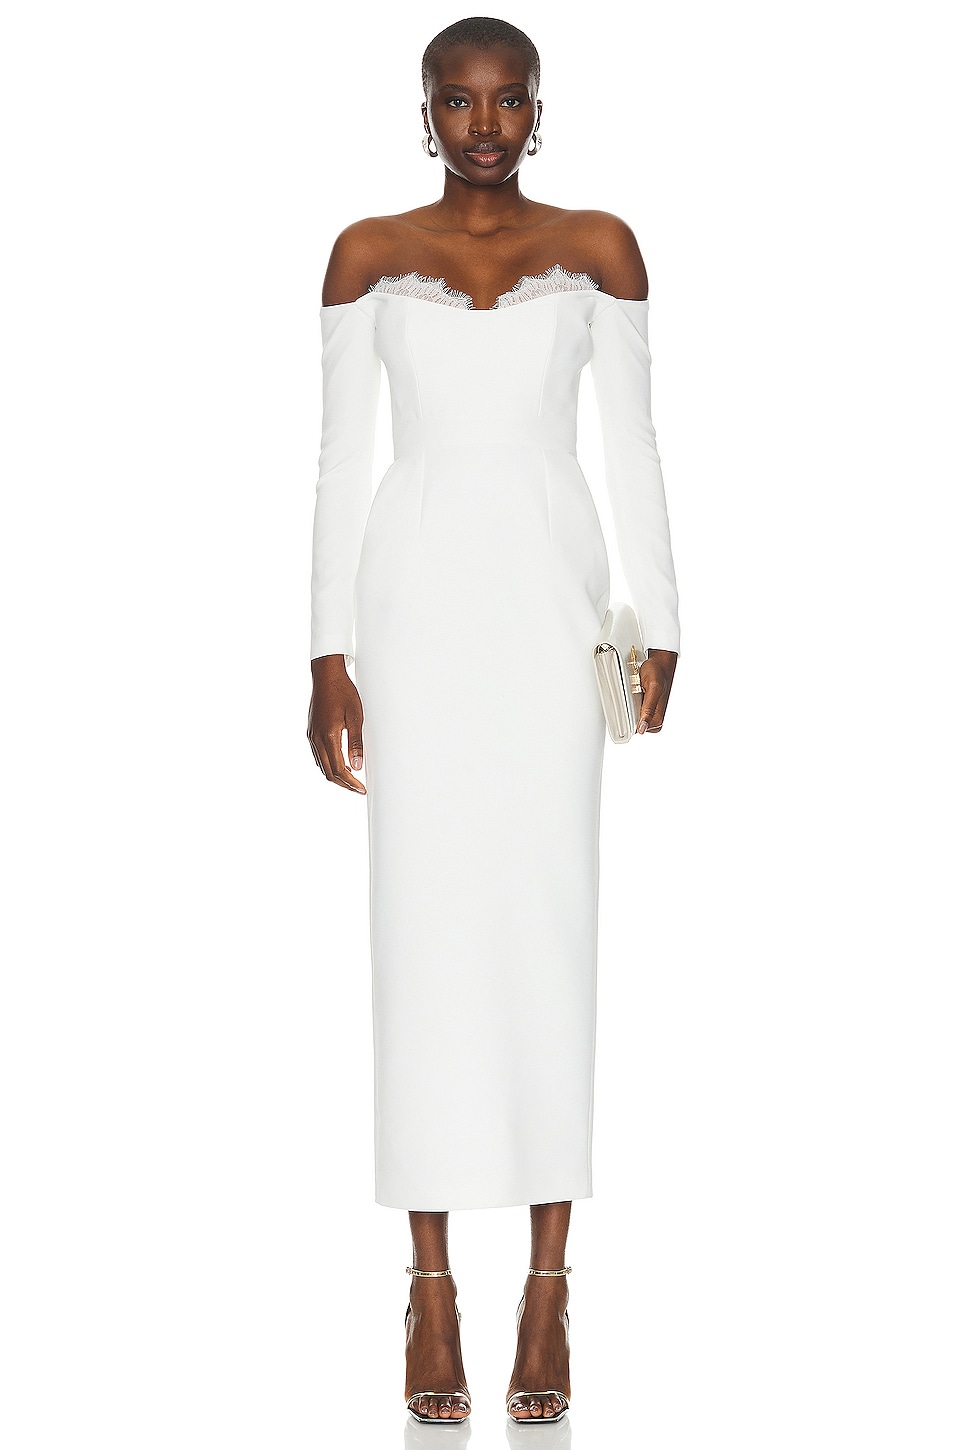 Image 1 of The New Arrivals by Ilkyaz Ozel Farah Dress in Temple White